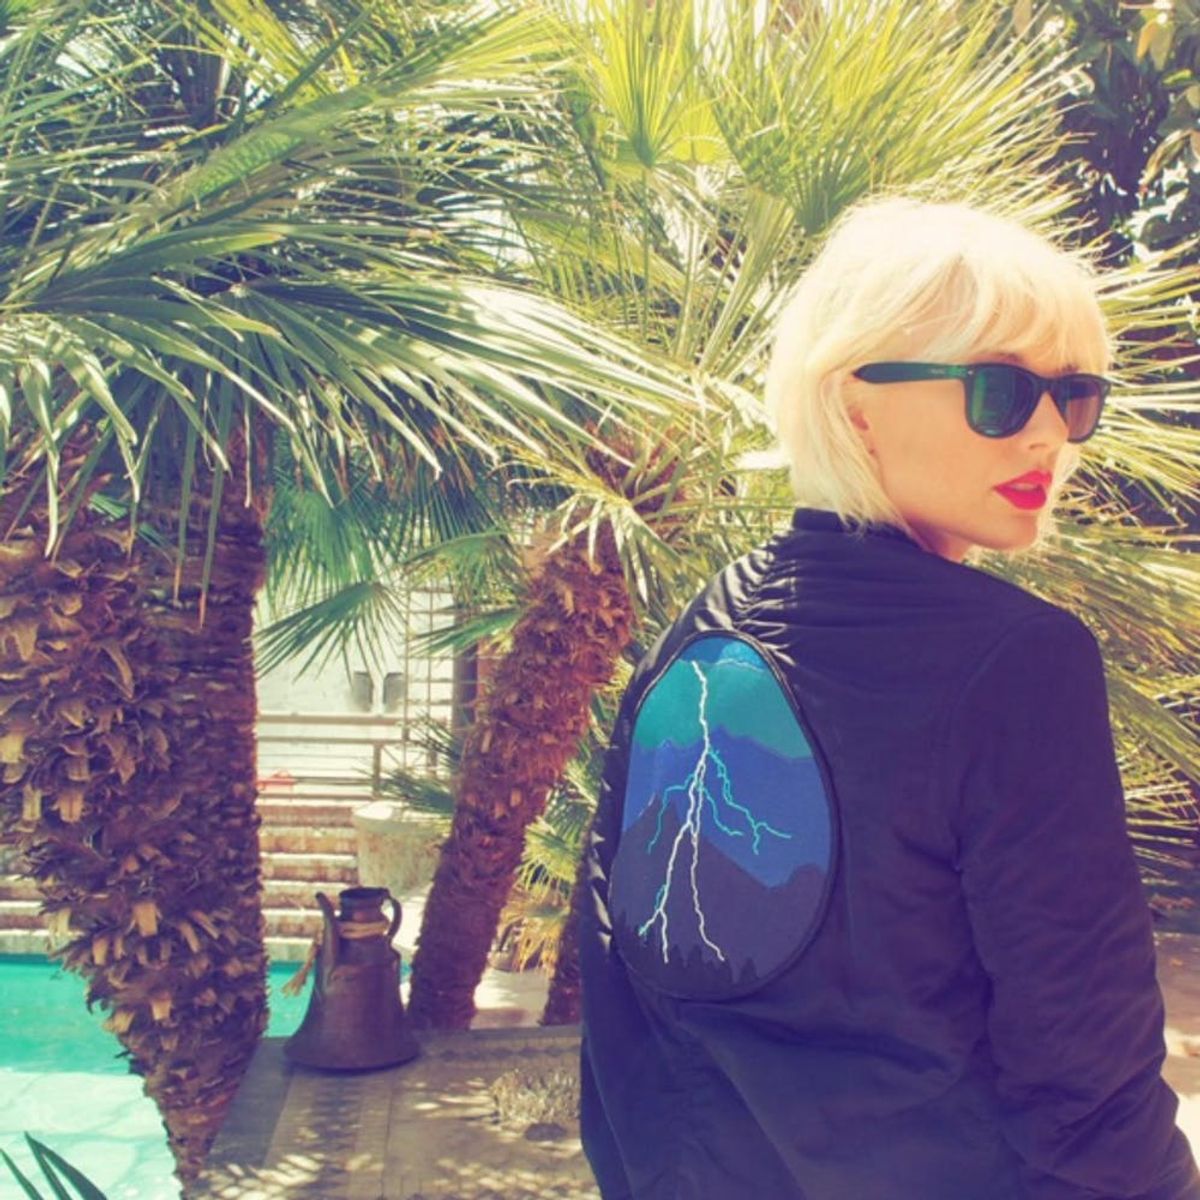 Taylor Swift’s Outfit Might Be a Big Hint About Boyfriend Calvin Harris